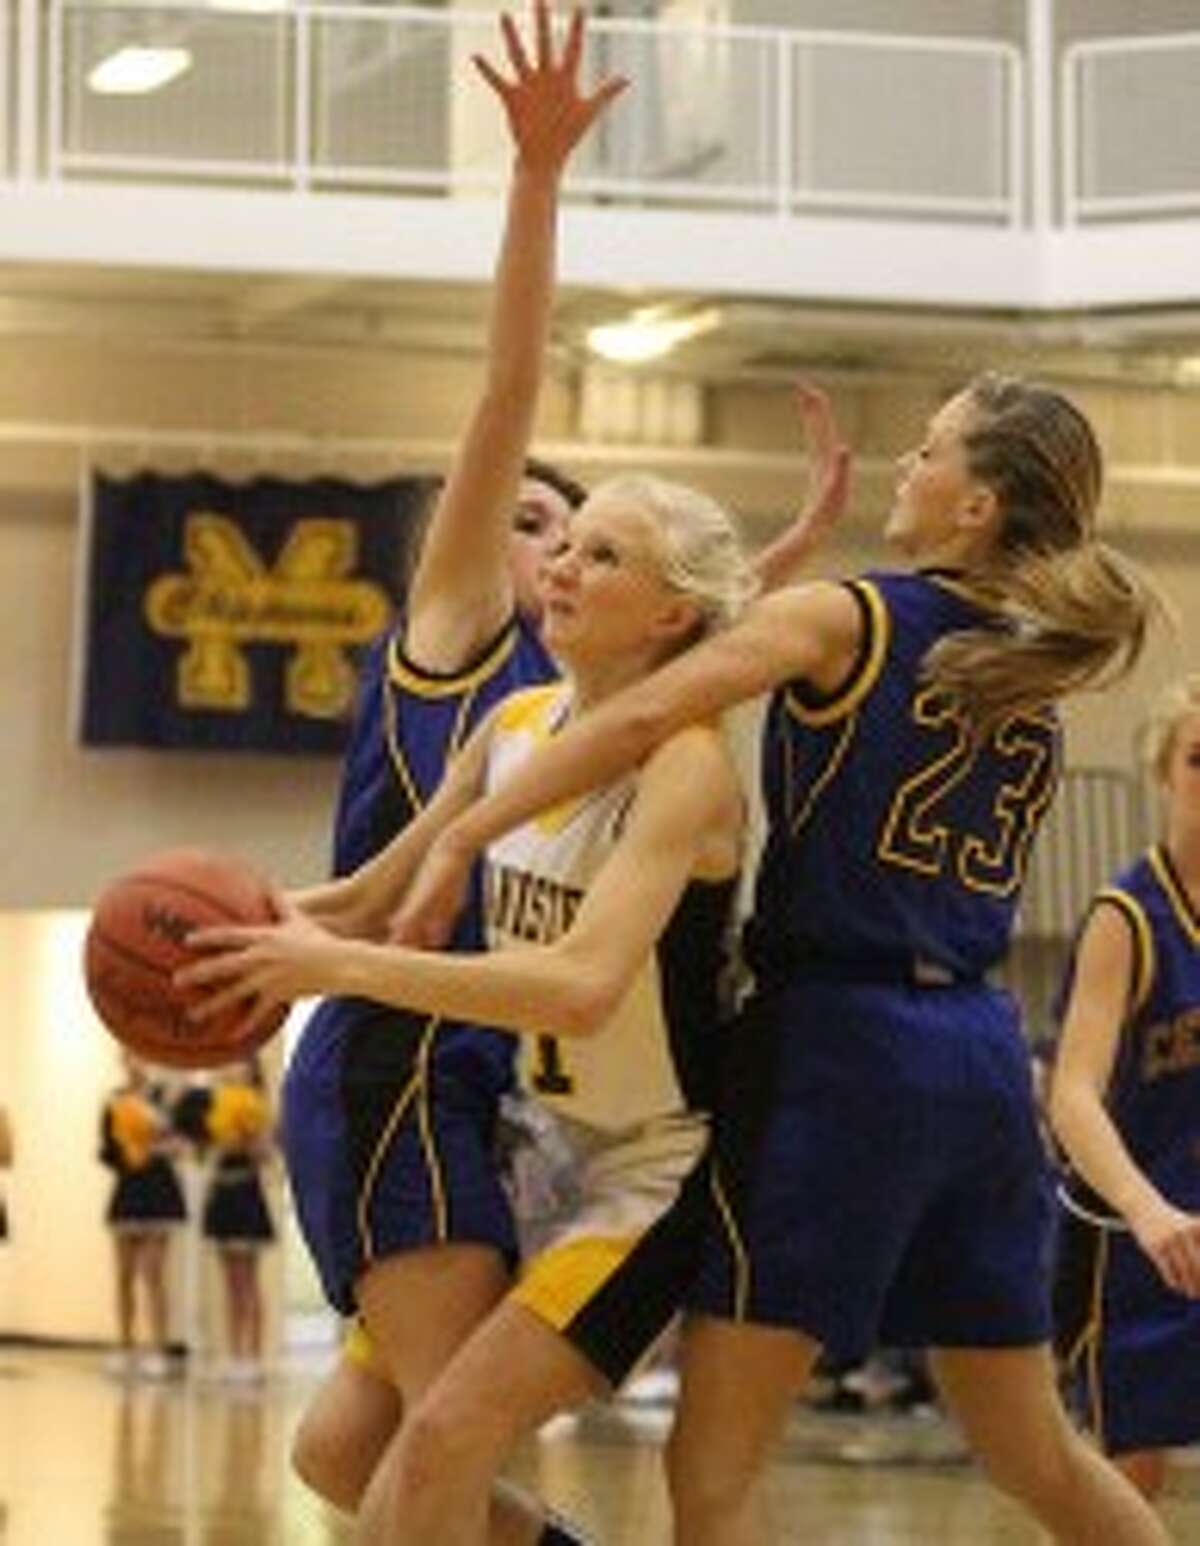 Annie Fuller (middle) draws a foul on MCC’s Payton Bladzik (23) during the first quarter. (Matt Wenzel/News Advocate)